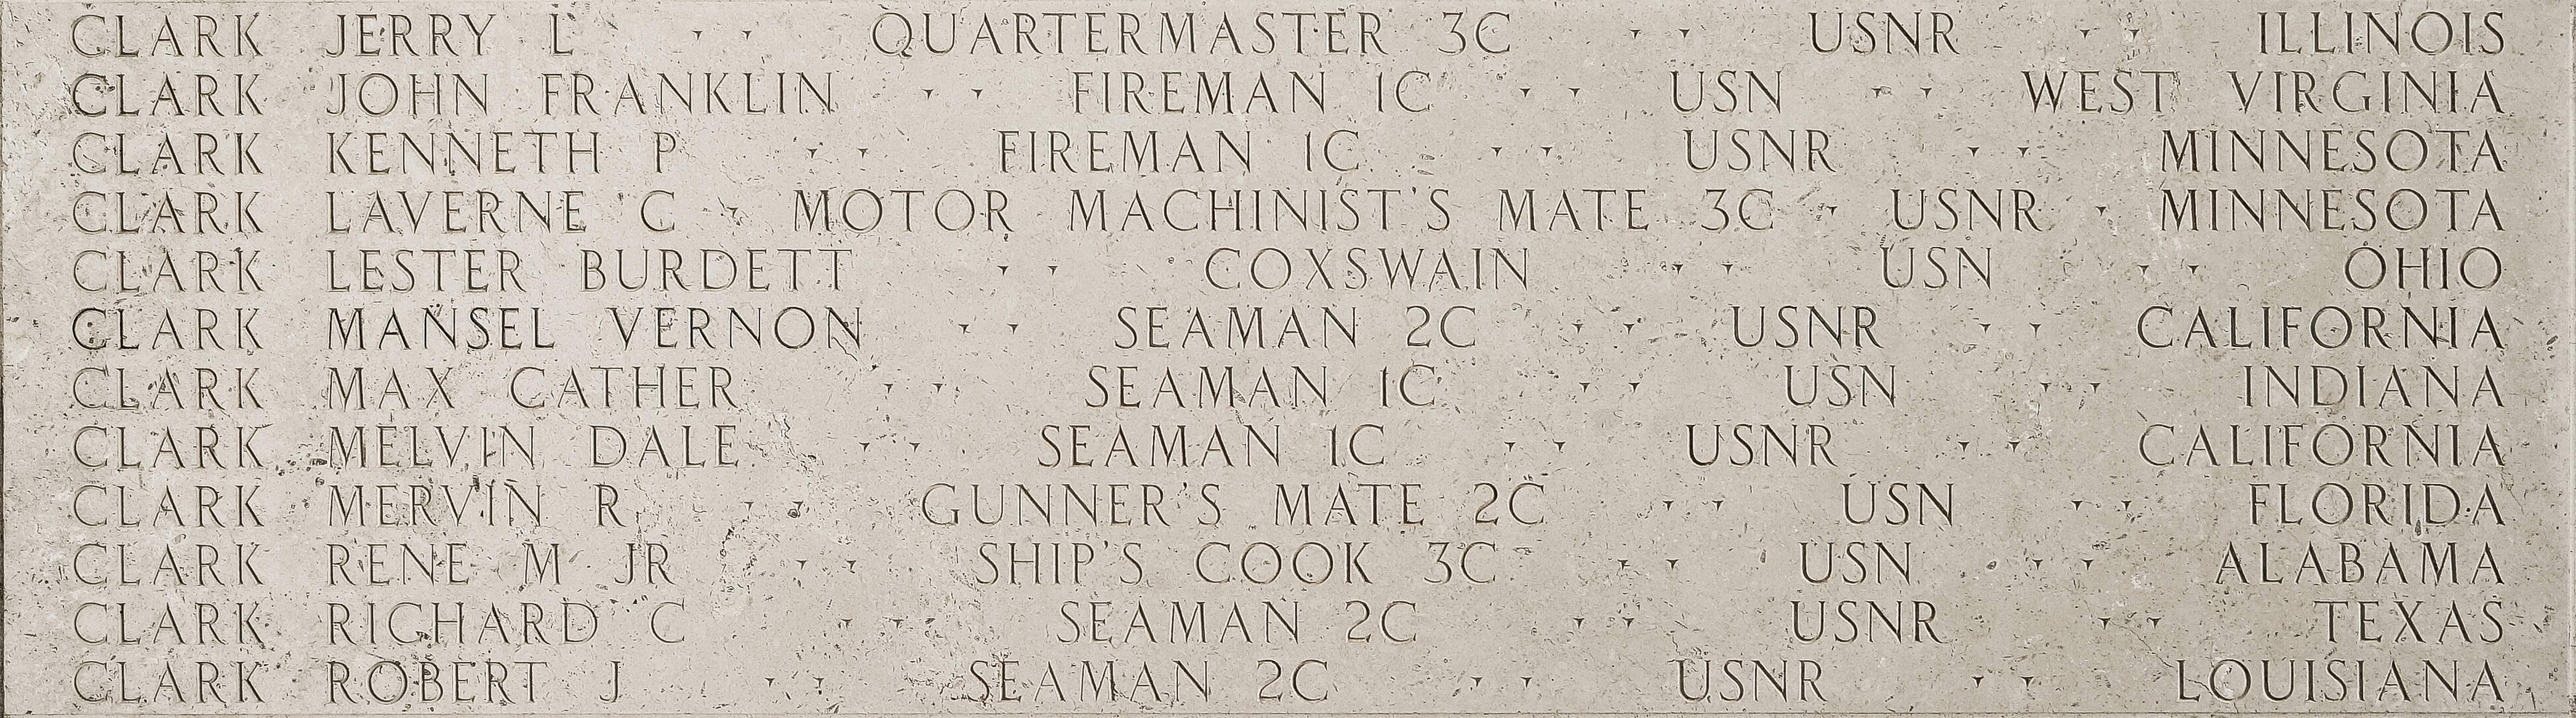 Max Cather Clark, Seaman First Class